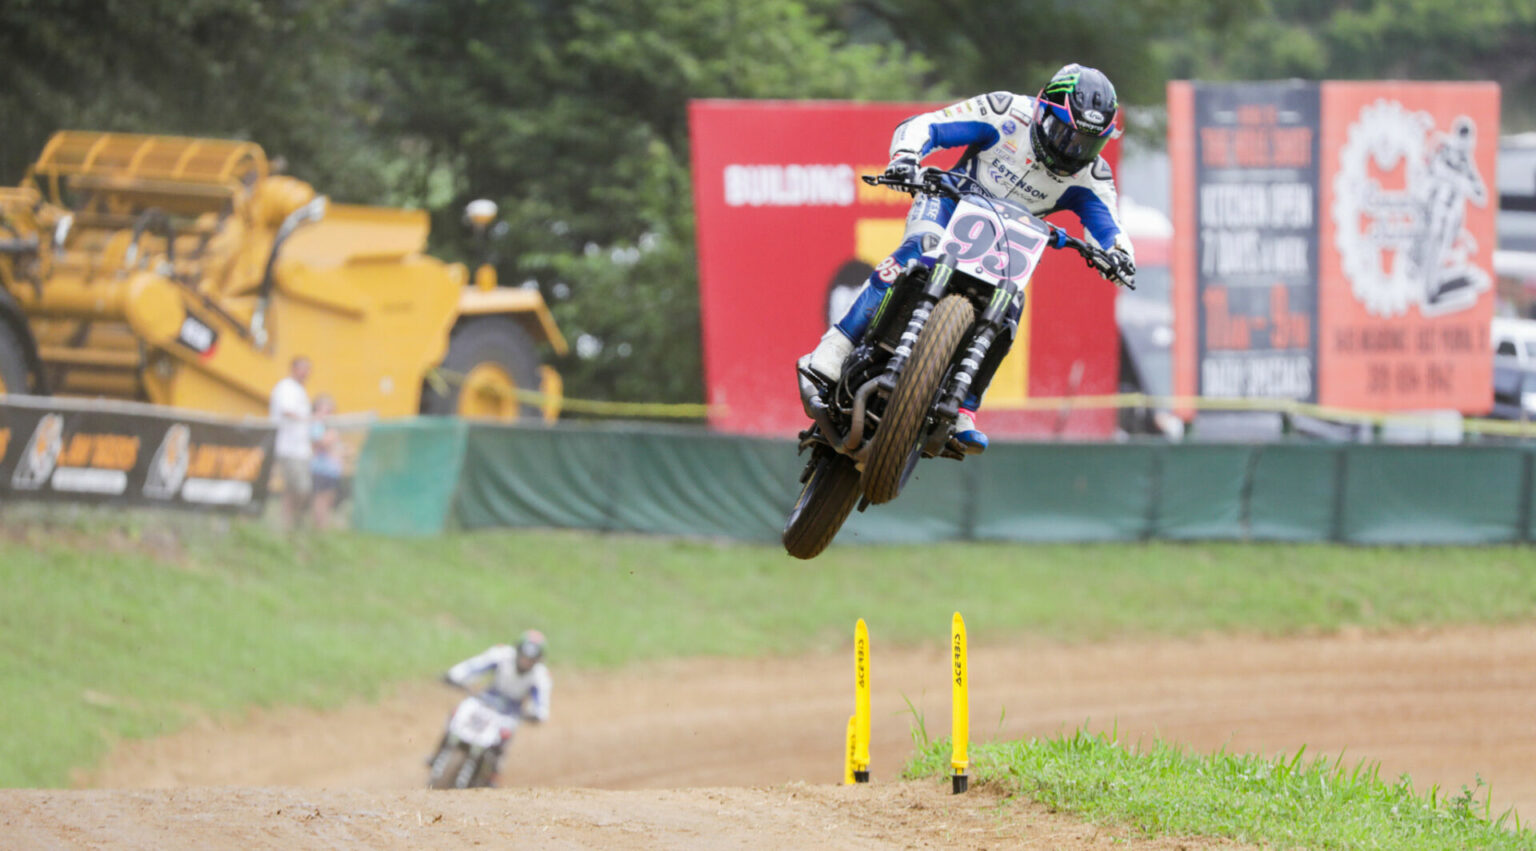 JD-Beach-95-in-action-at-the-Peoria-TT-i